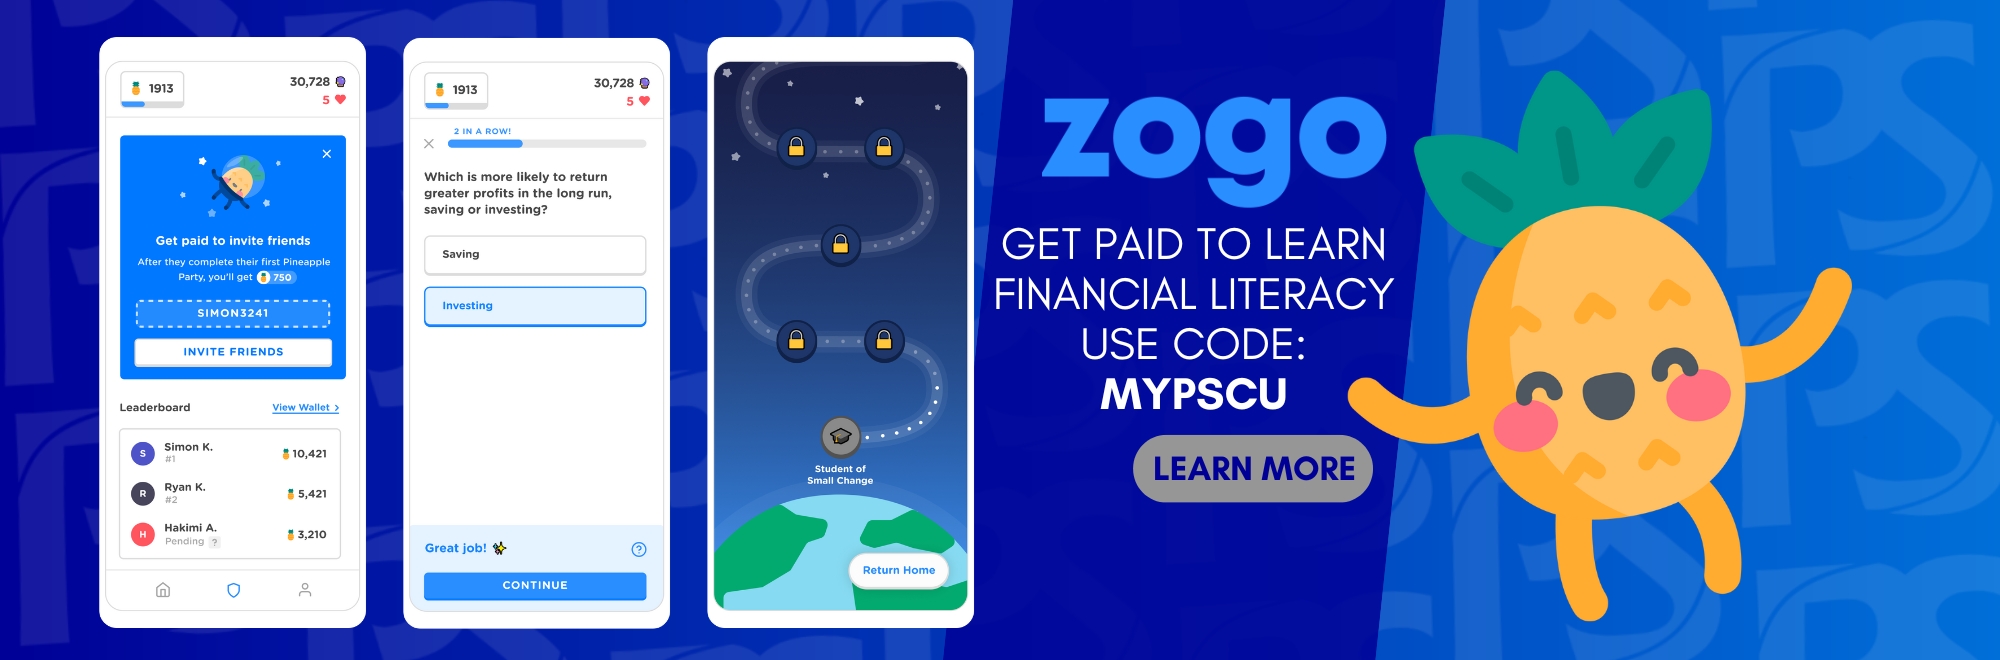 Zogo Get paid to learn financial literacy Use code MYPSCU click to learn more